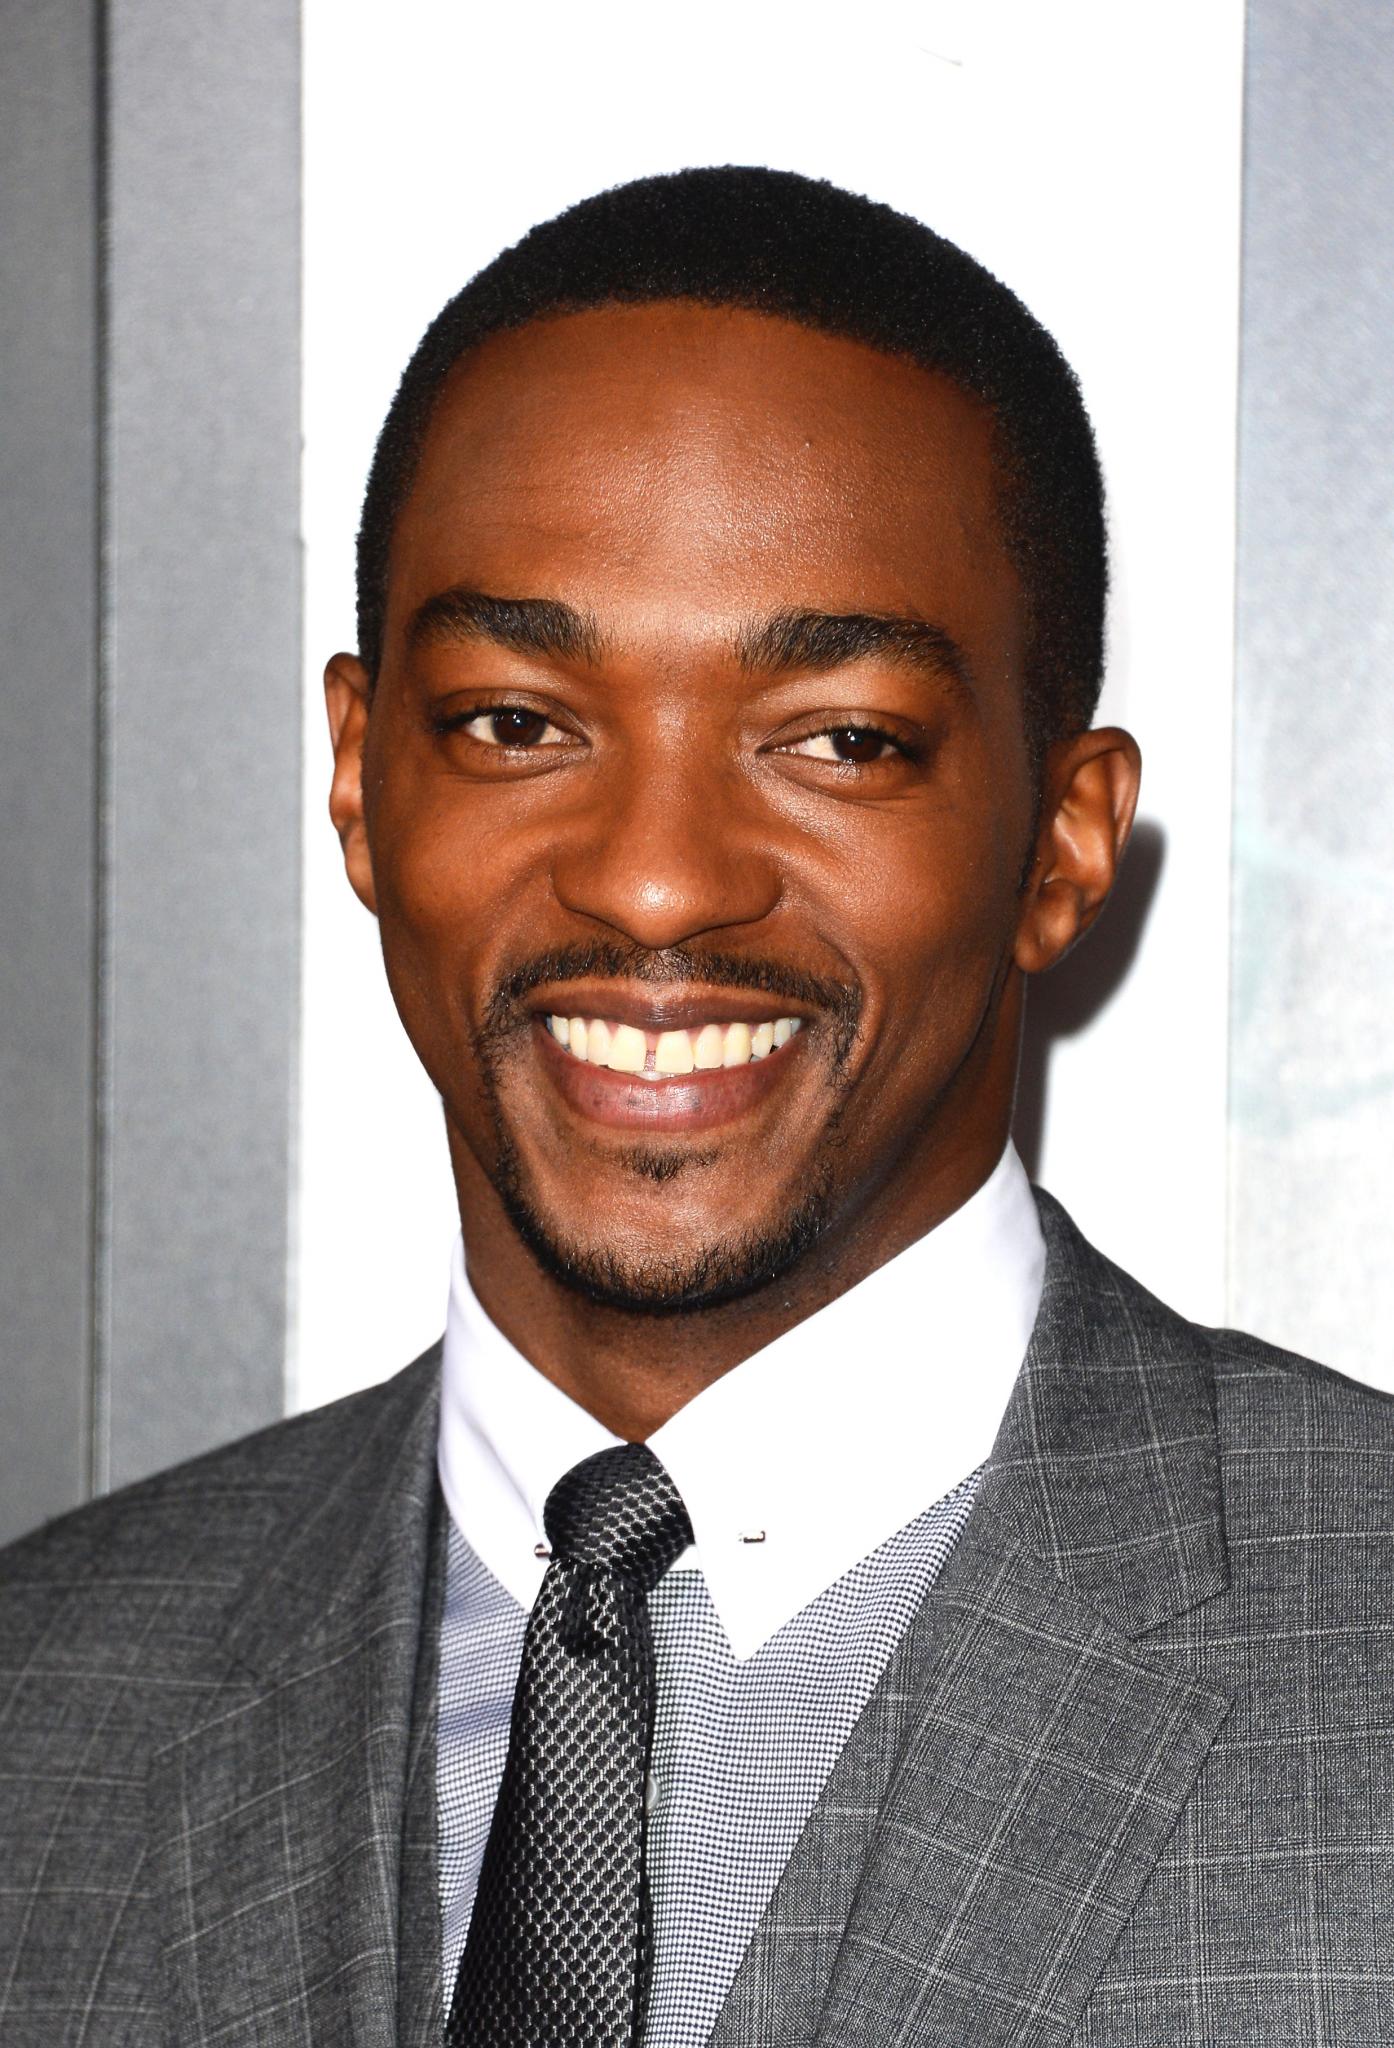 Anthony Mackie on 'Gangster Squad' & Being the First Black Superhero